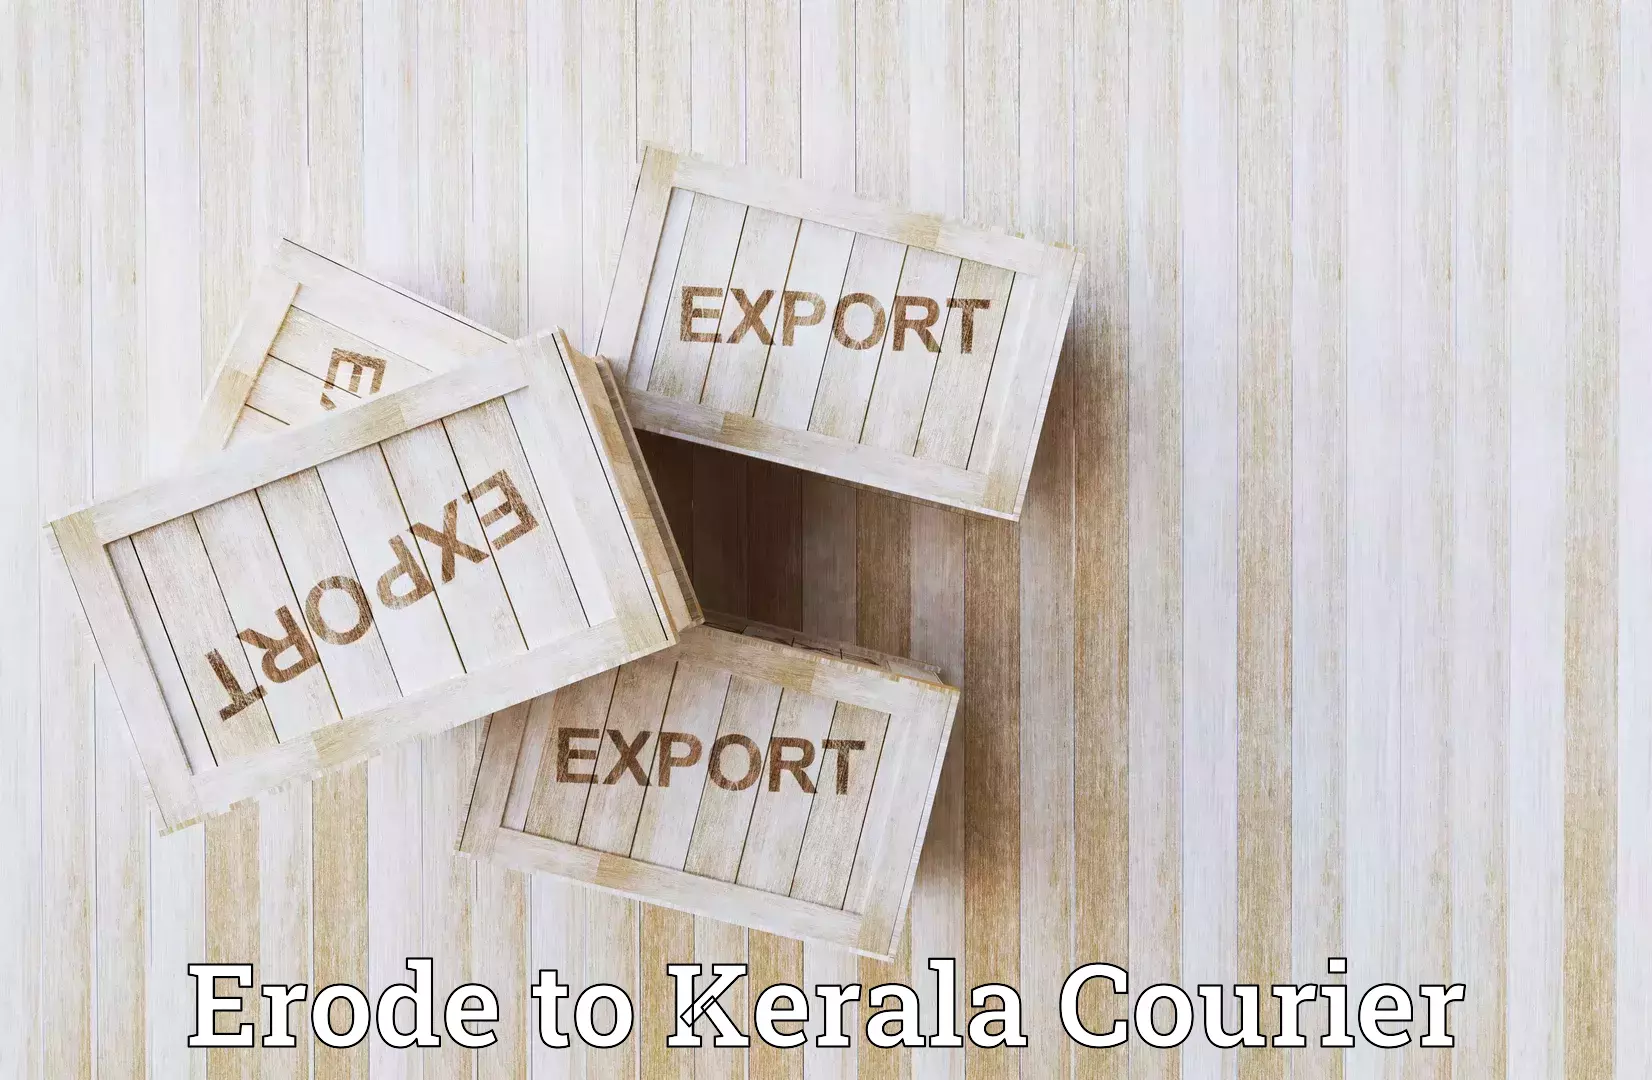 Express delivery capabilities in Erode to Kerala